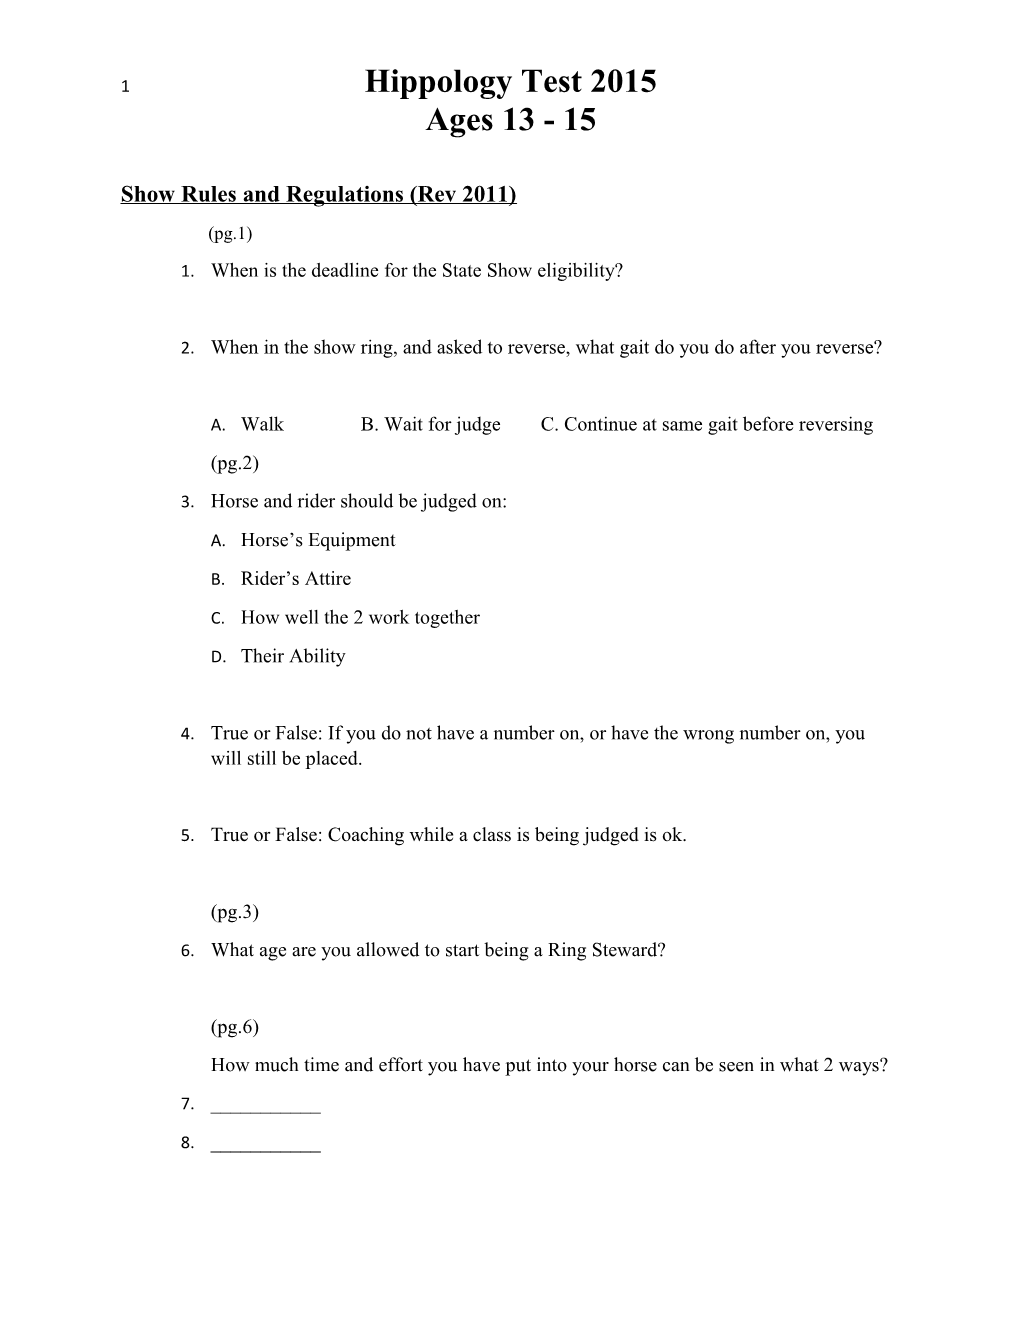 Show Rules and Regulations (Rev 2011)